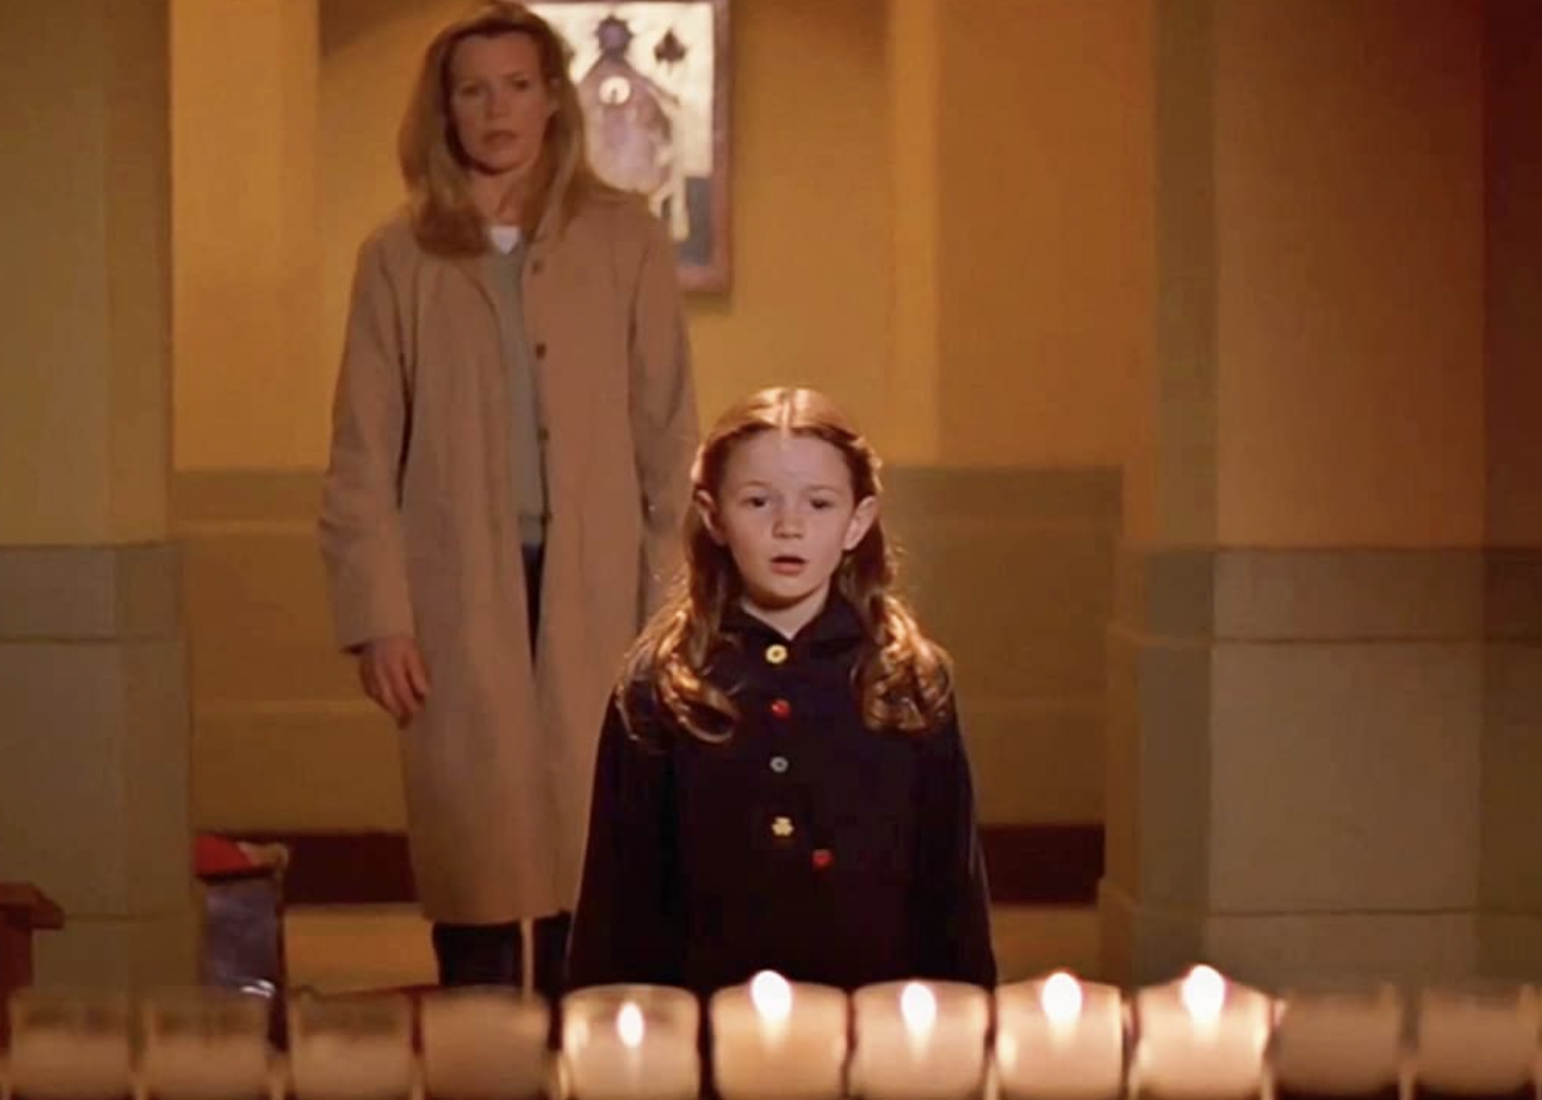 Kim Basinger and Holliston Coleman in "Bless the Child"